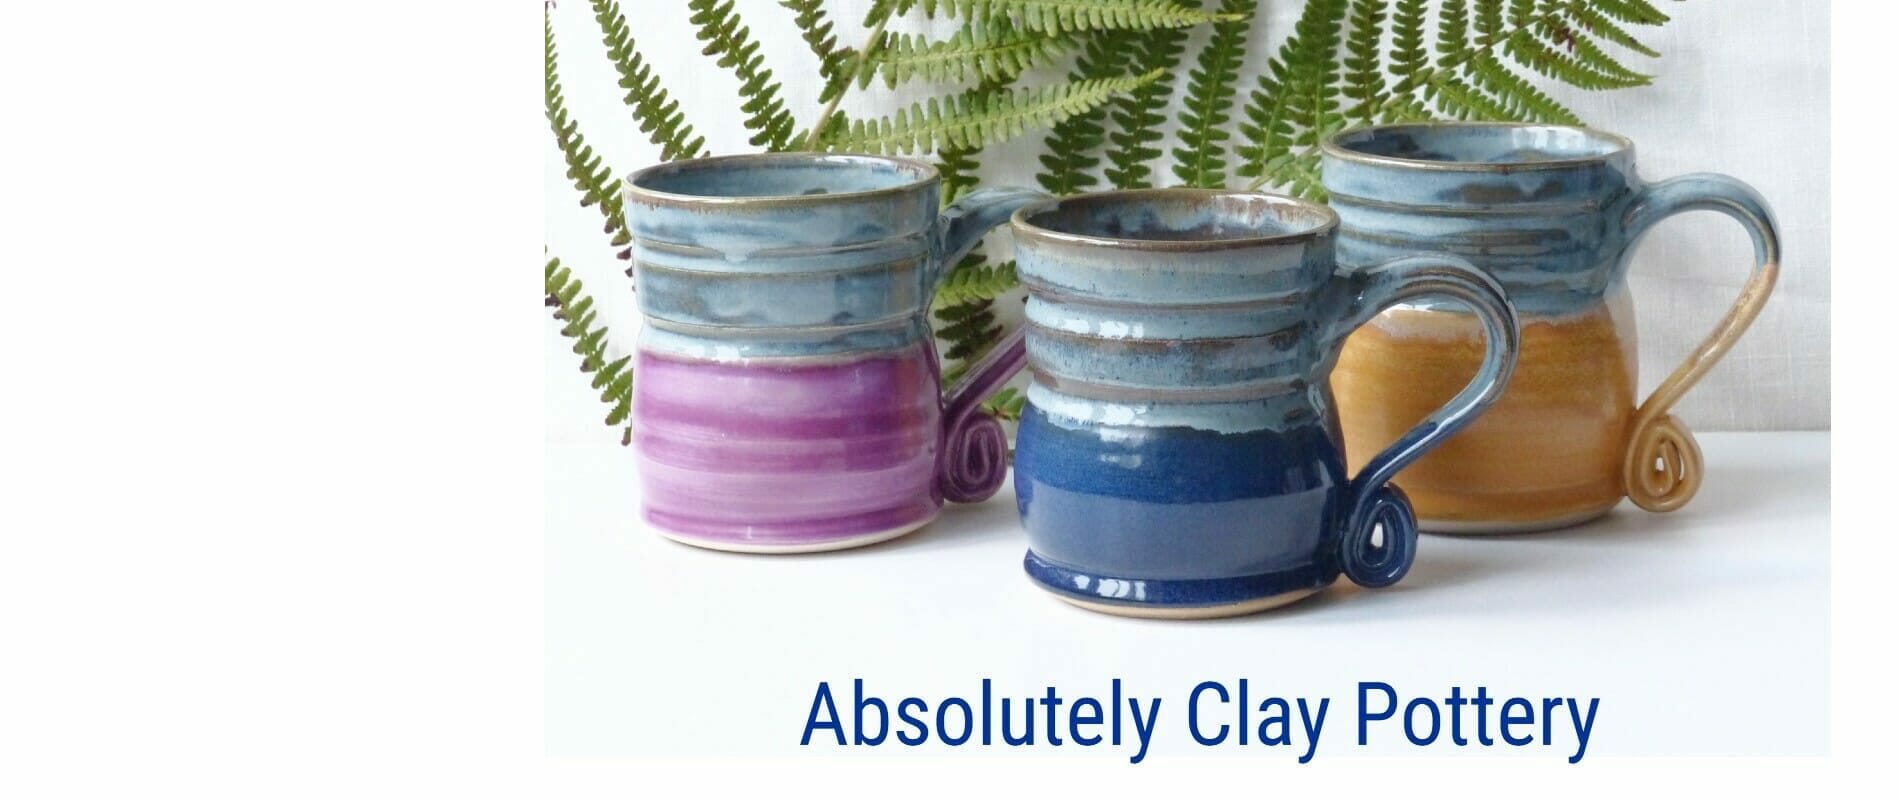 Absolutely Clay Pottery